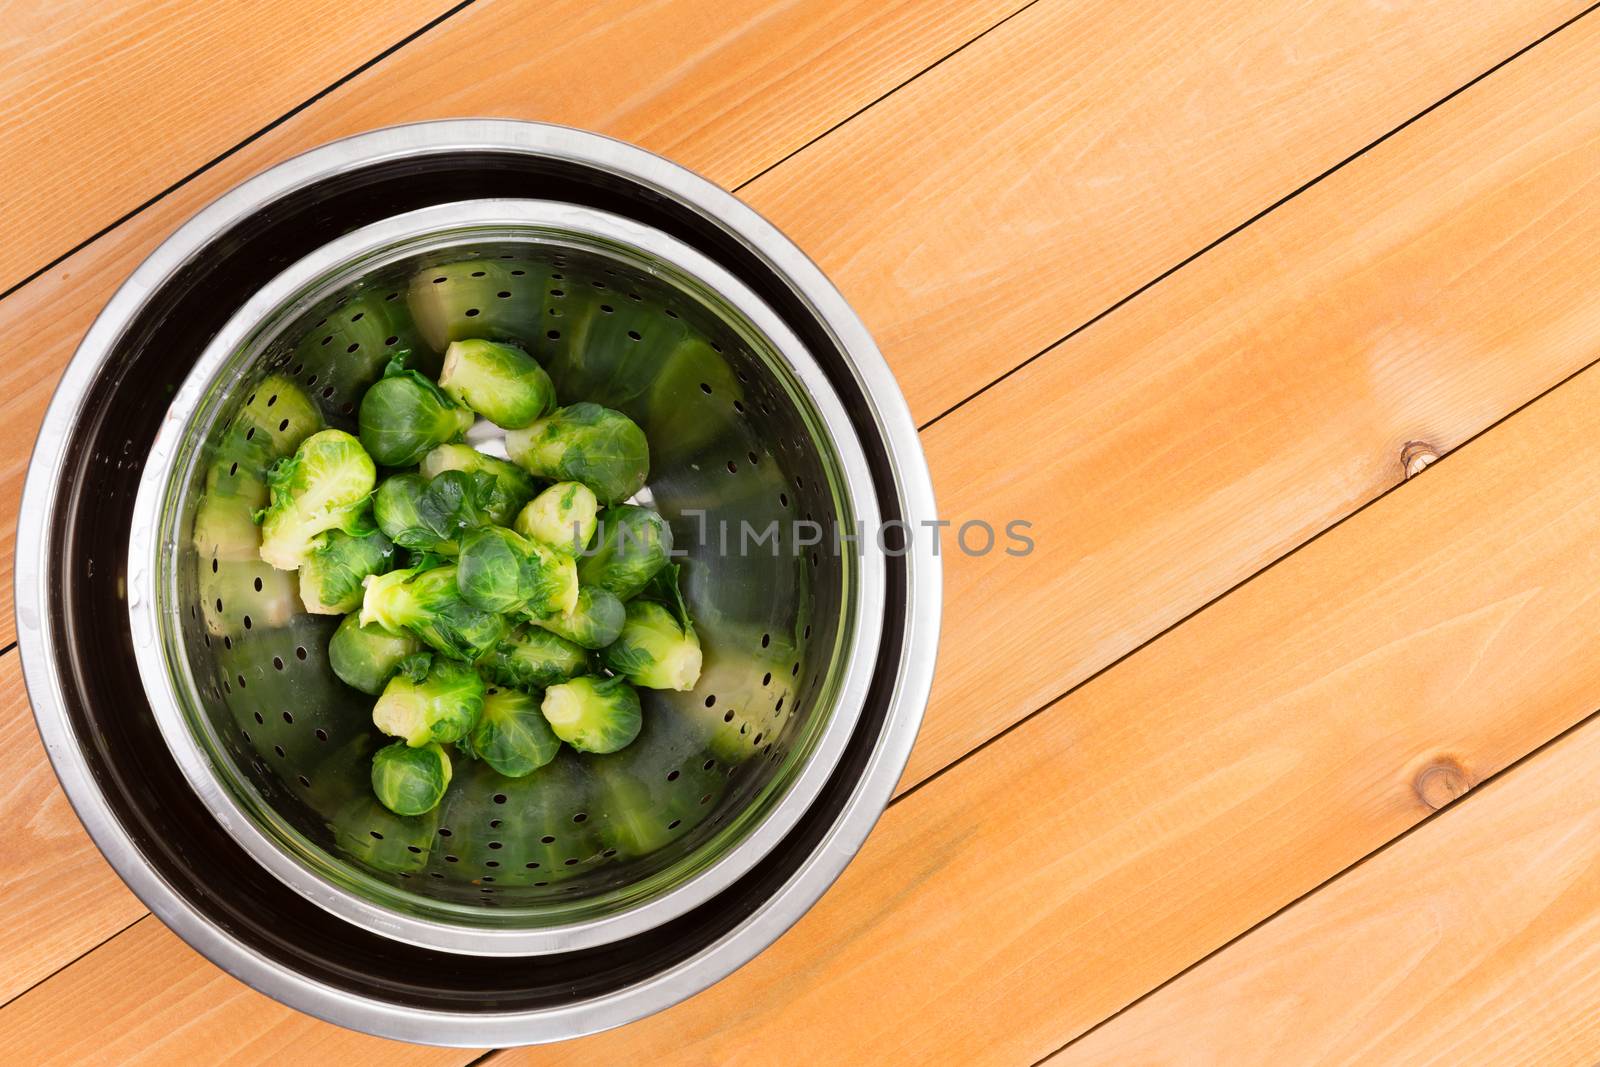 Freshly boiled leafy green brussels sprouts in a stainless steel strainer or colander viewed from above on a wooden table with copy space